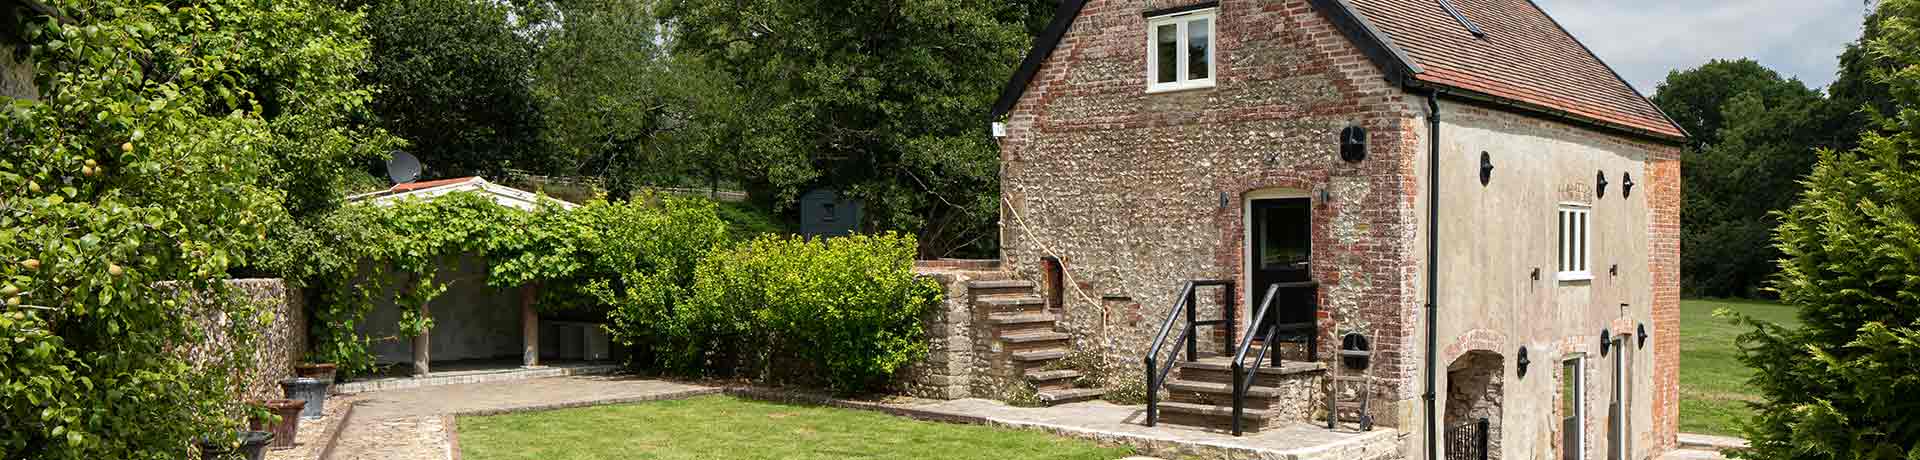 Cottages for 4 people in Wiltshire